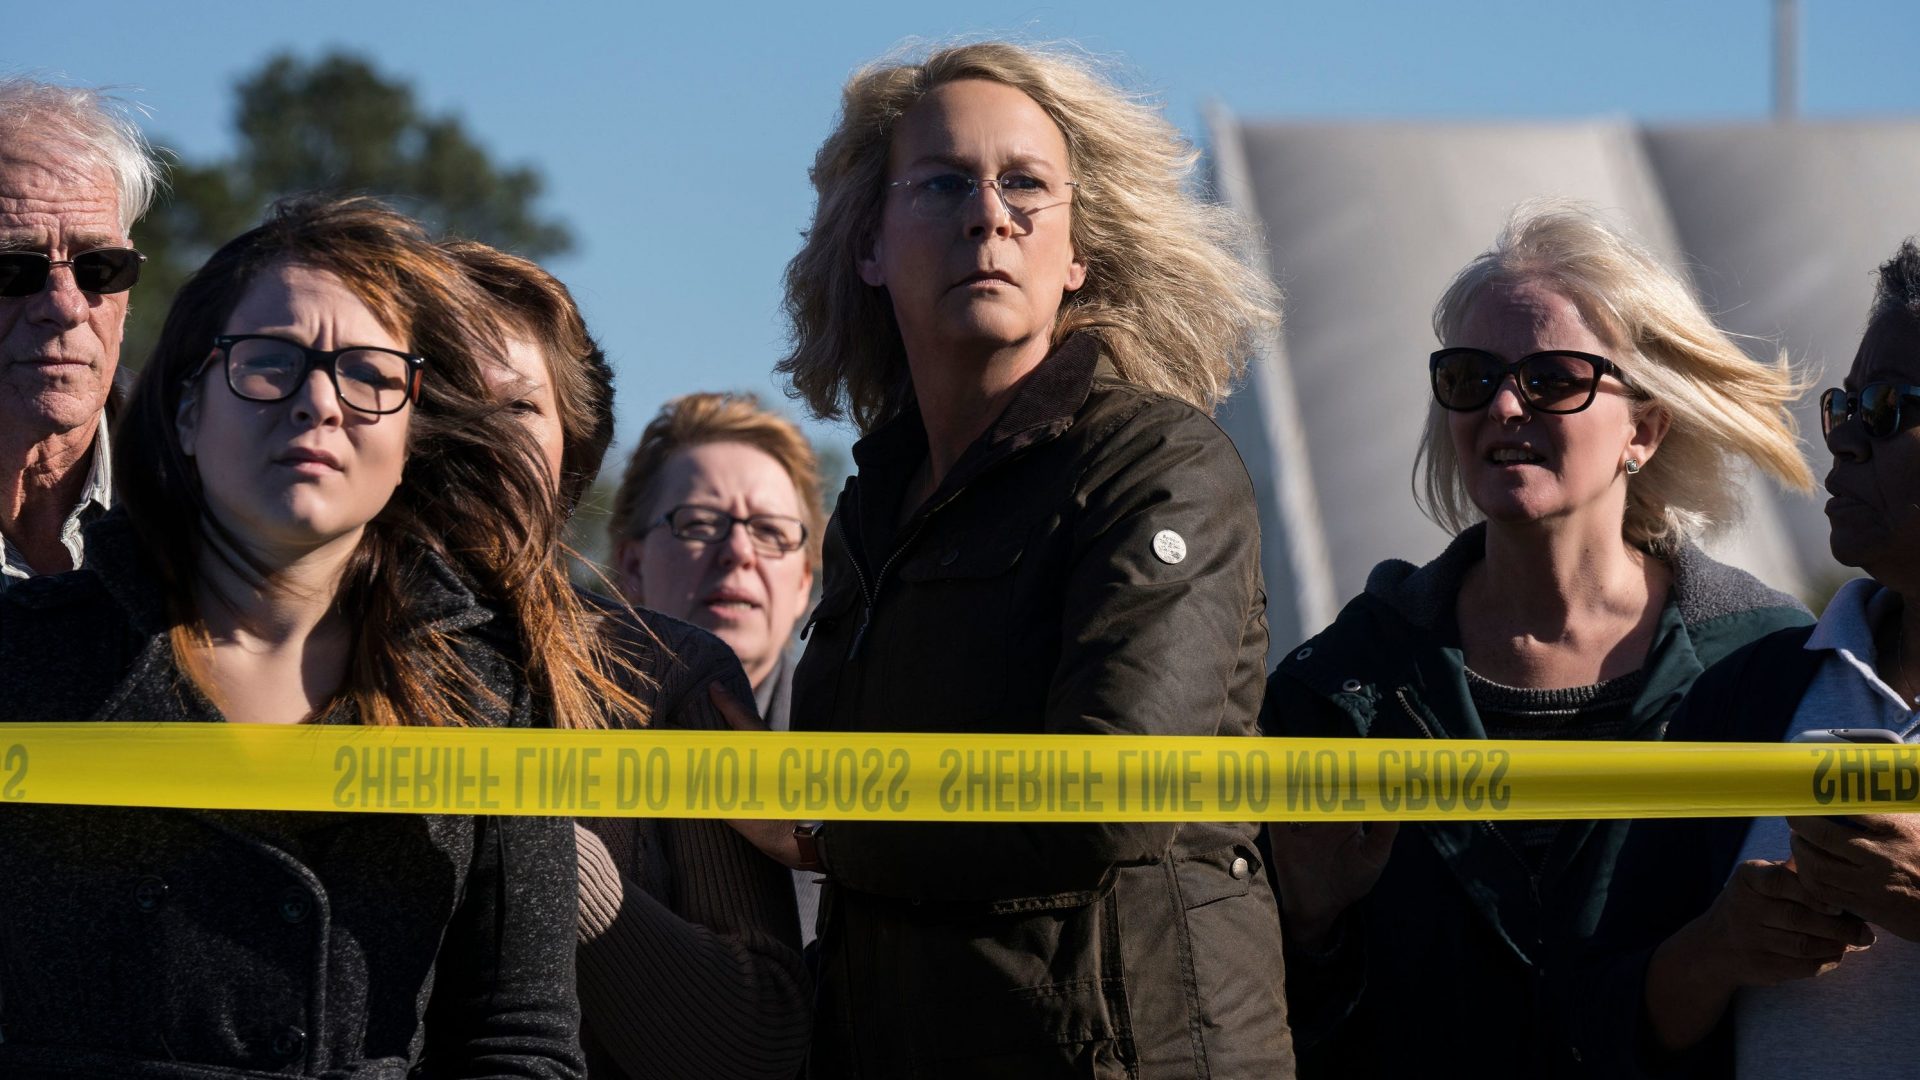 ‘Halloween Kills’ drops yet another teaser trailer, Jamie Lee Curtis says film connects to BLM